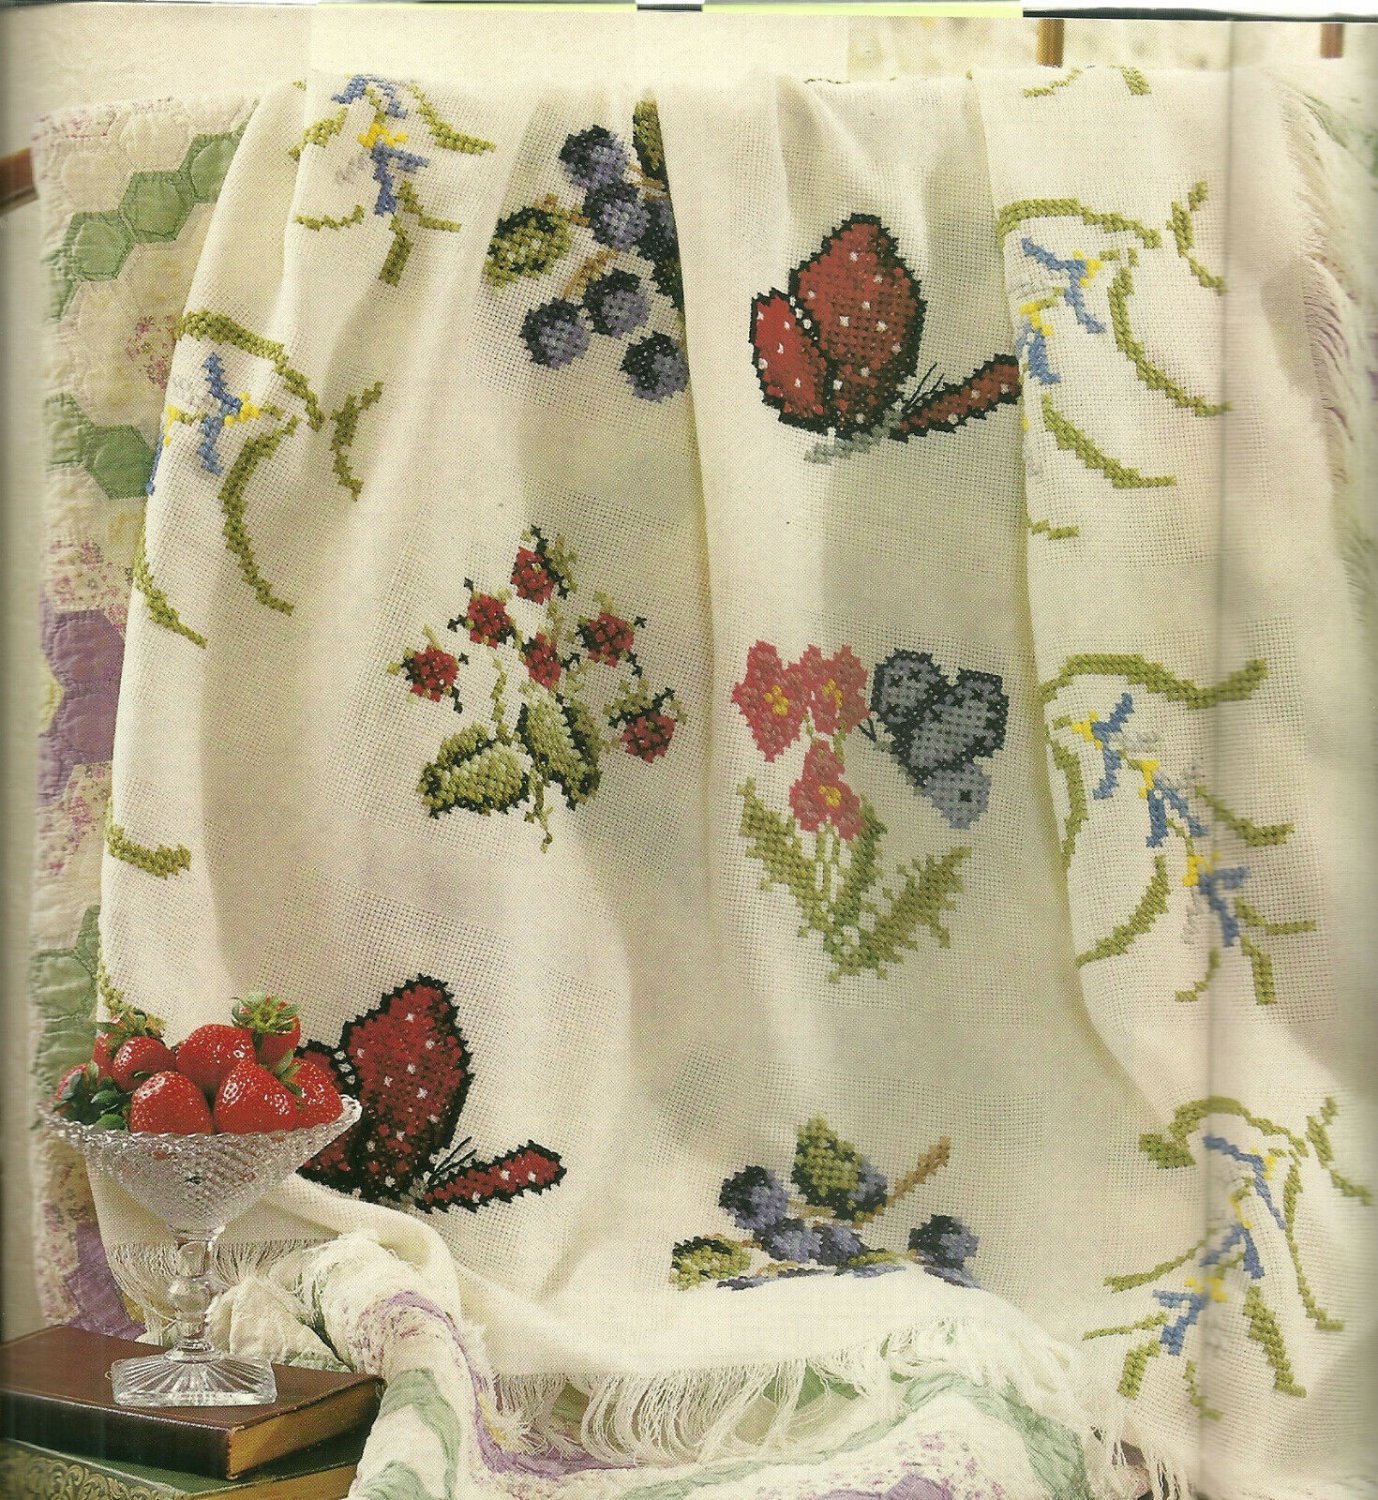 butterflies and berries afghan CROSS STITCH PATTERN